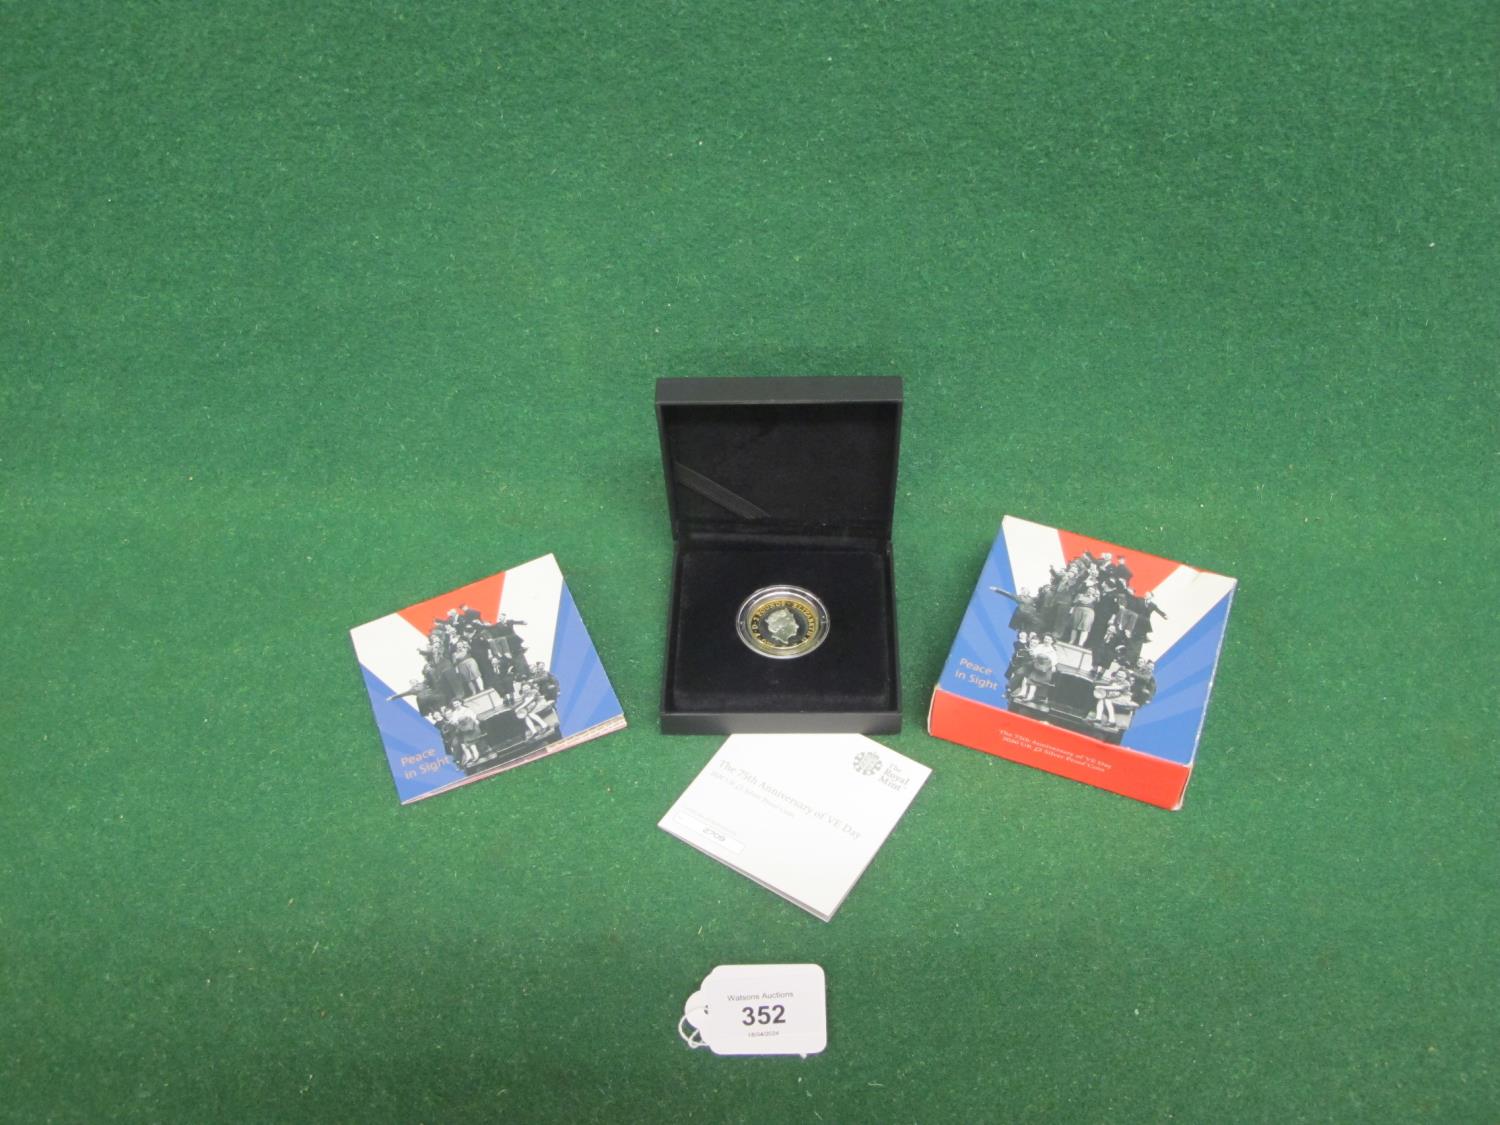 2020 Royal Mint 75th Anniversary of VE Day UK £2 silver proof coin, in presentation box with booklet